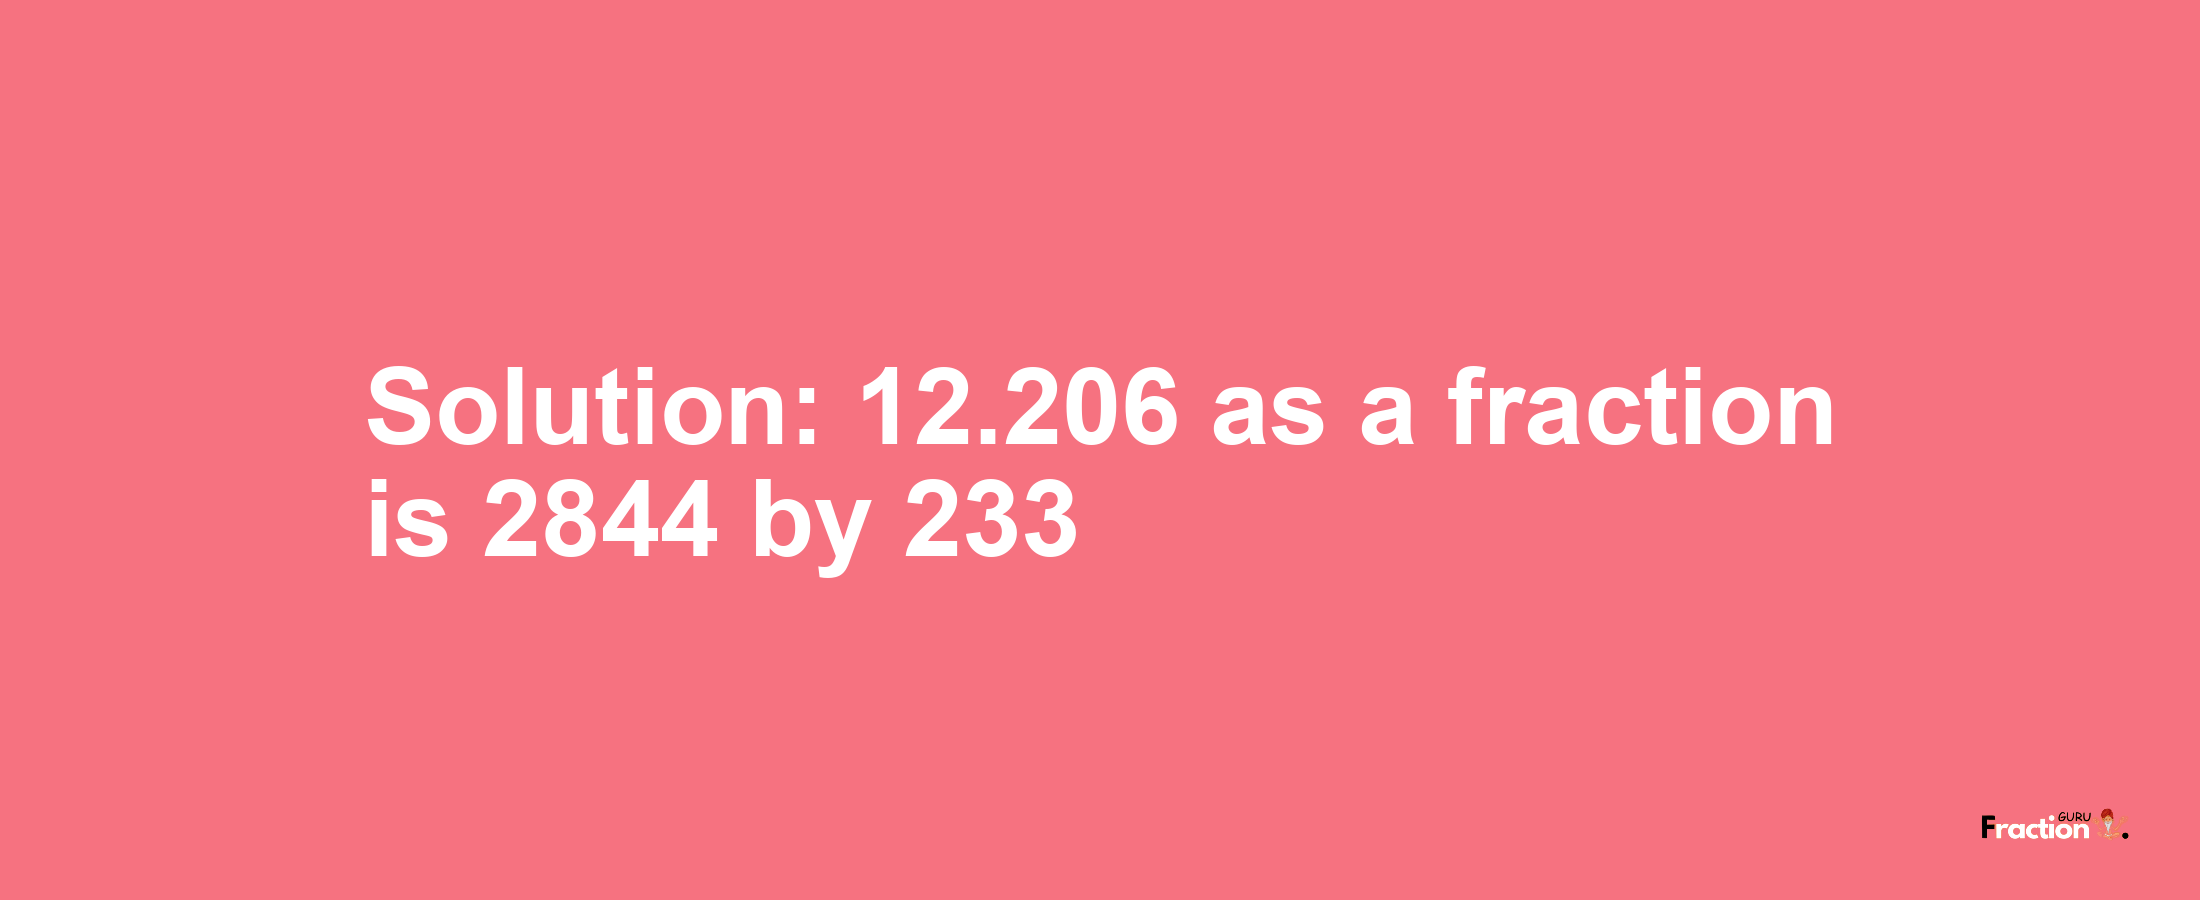 Solution:12.206 as a fraction is 2844/233